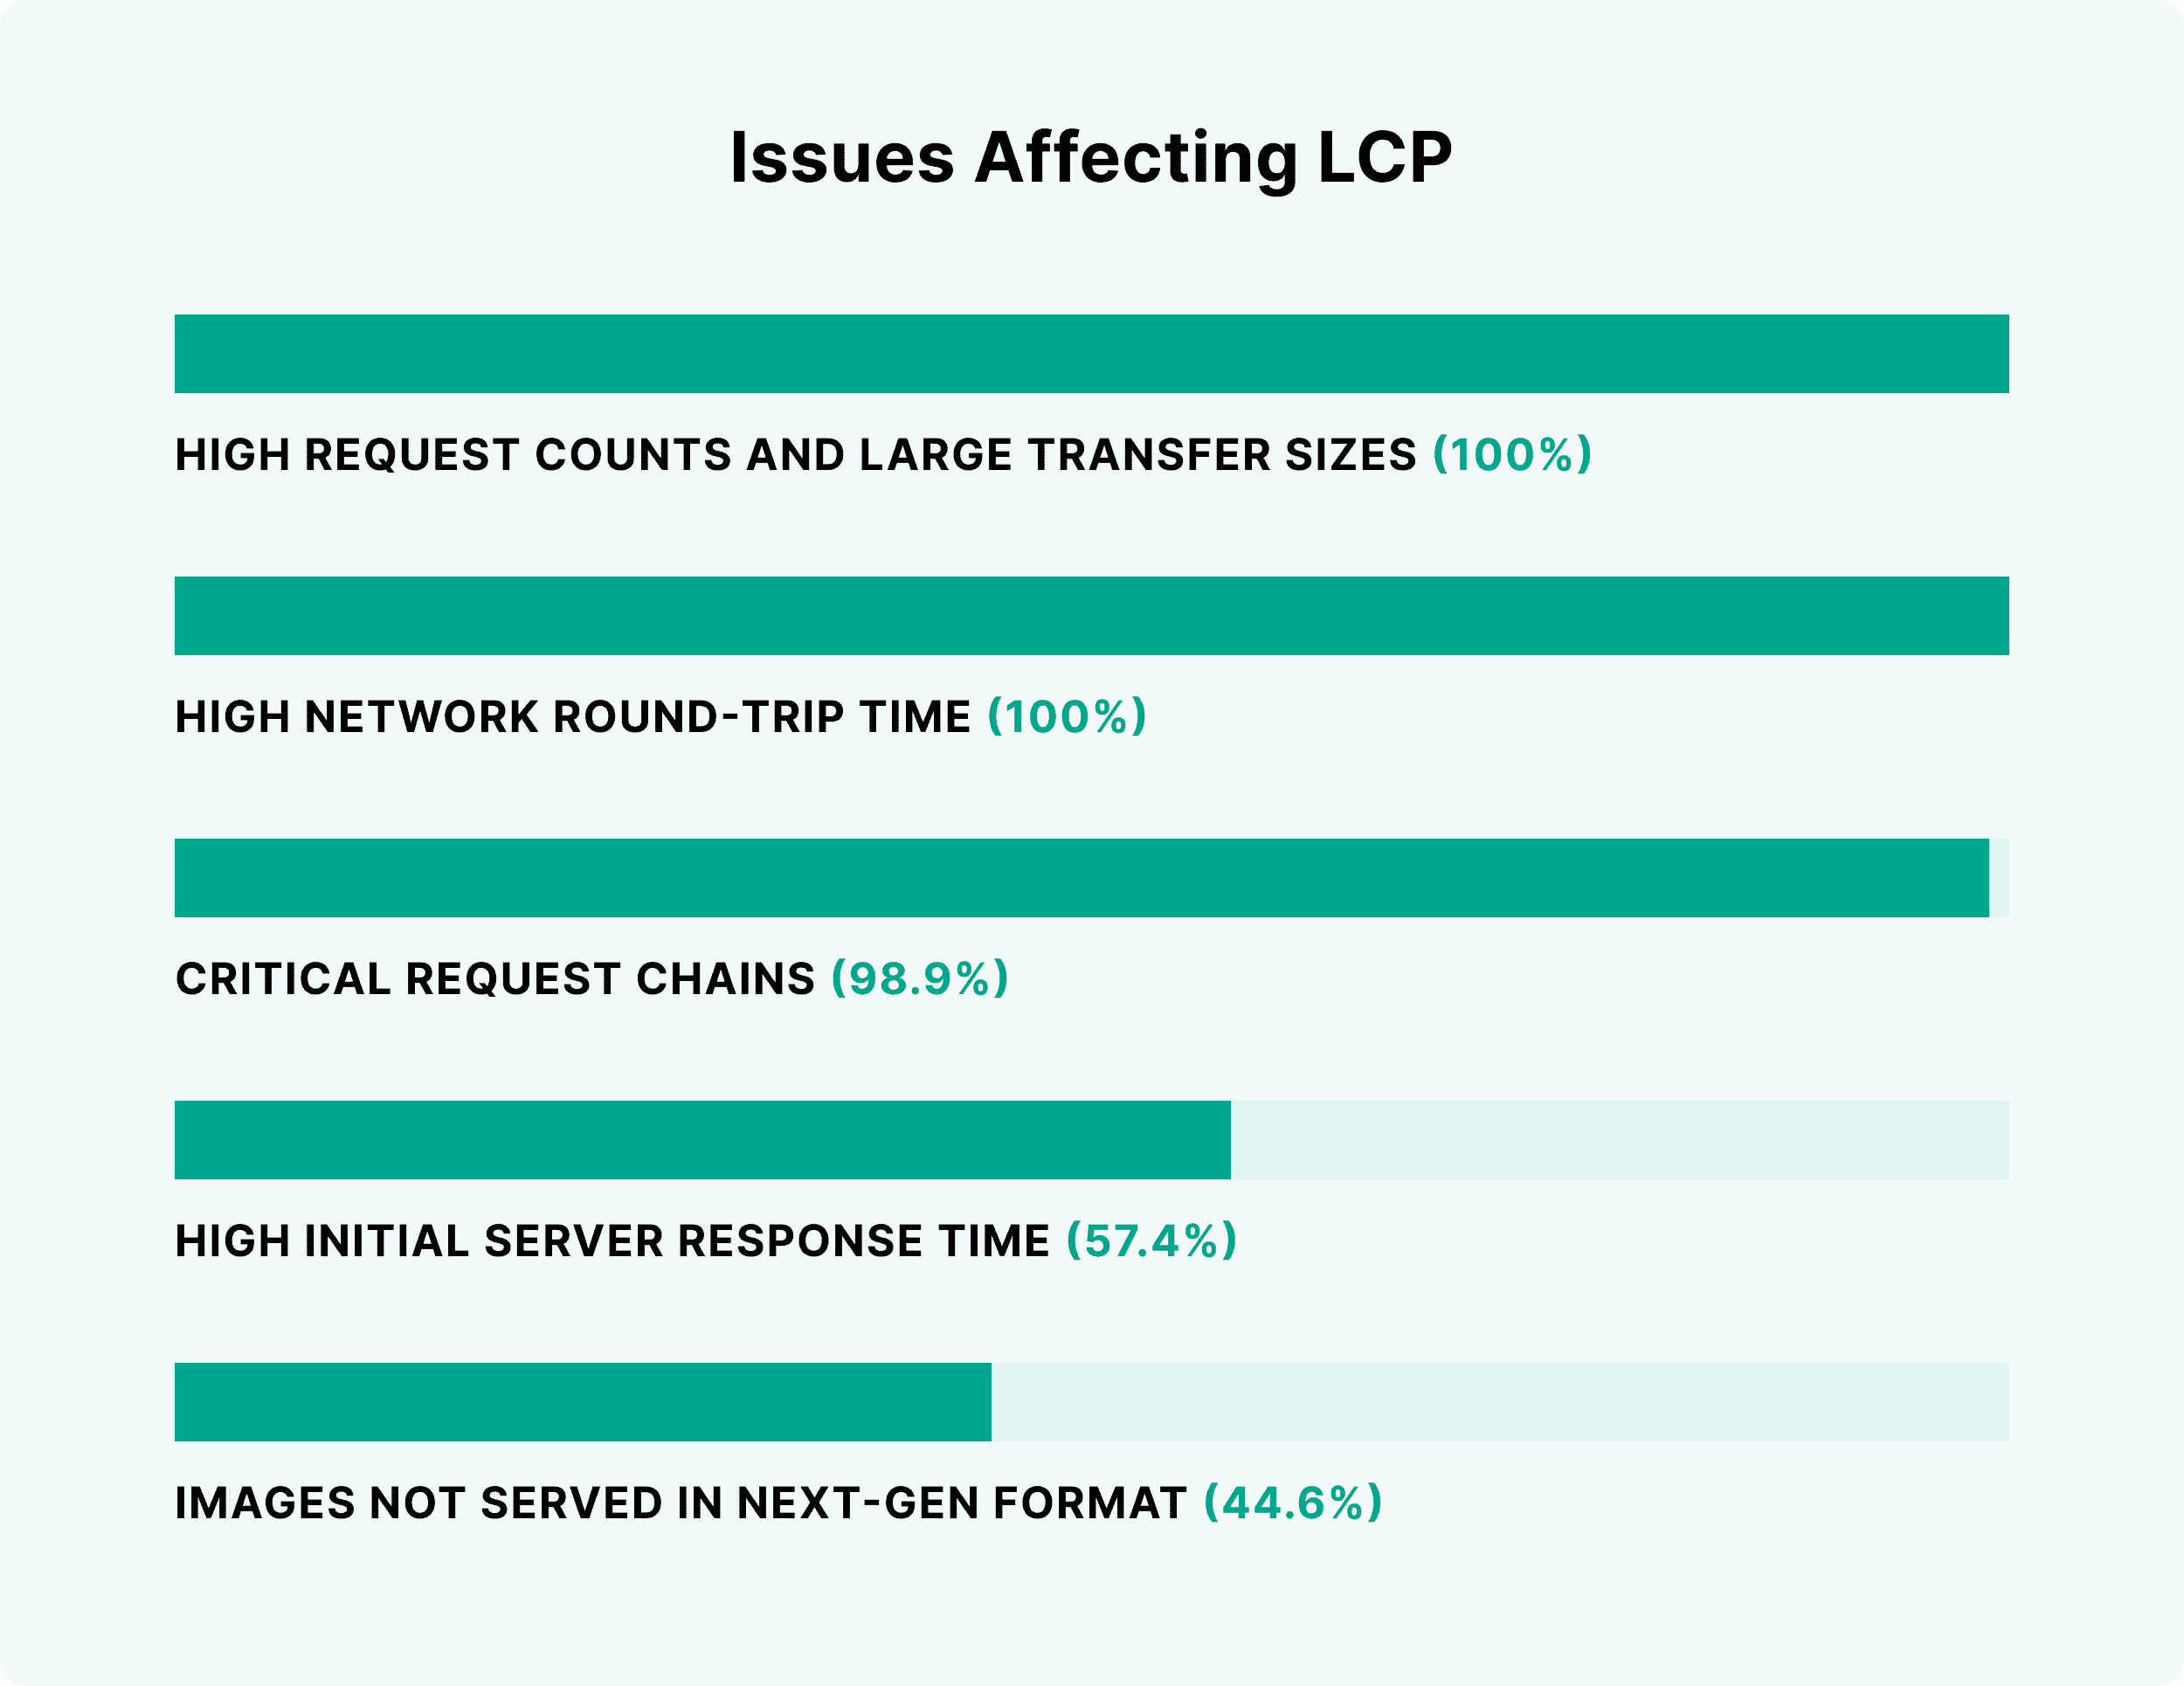 Issues affecting LCP